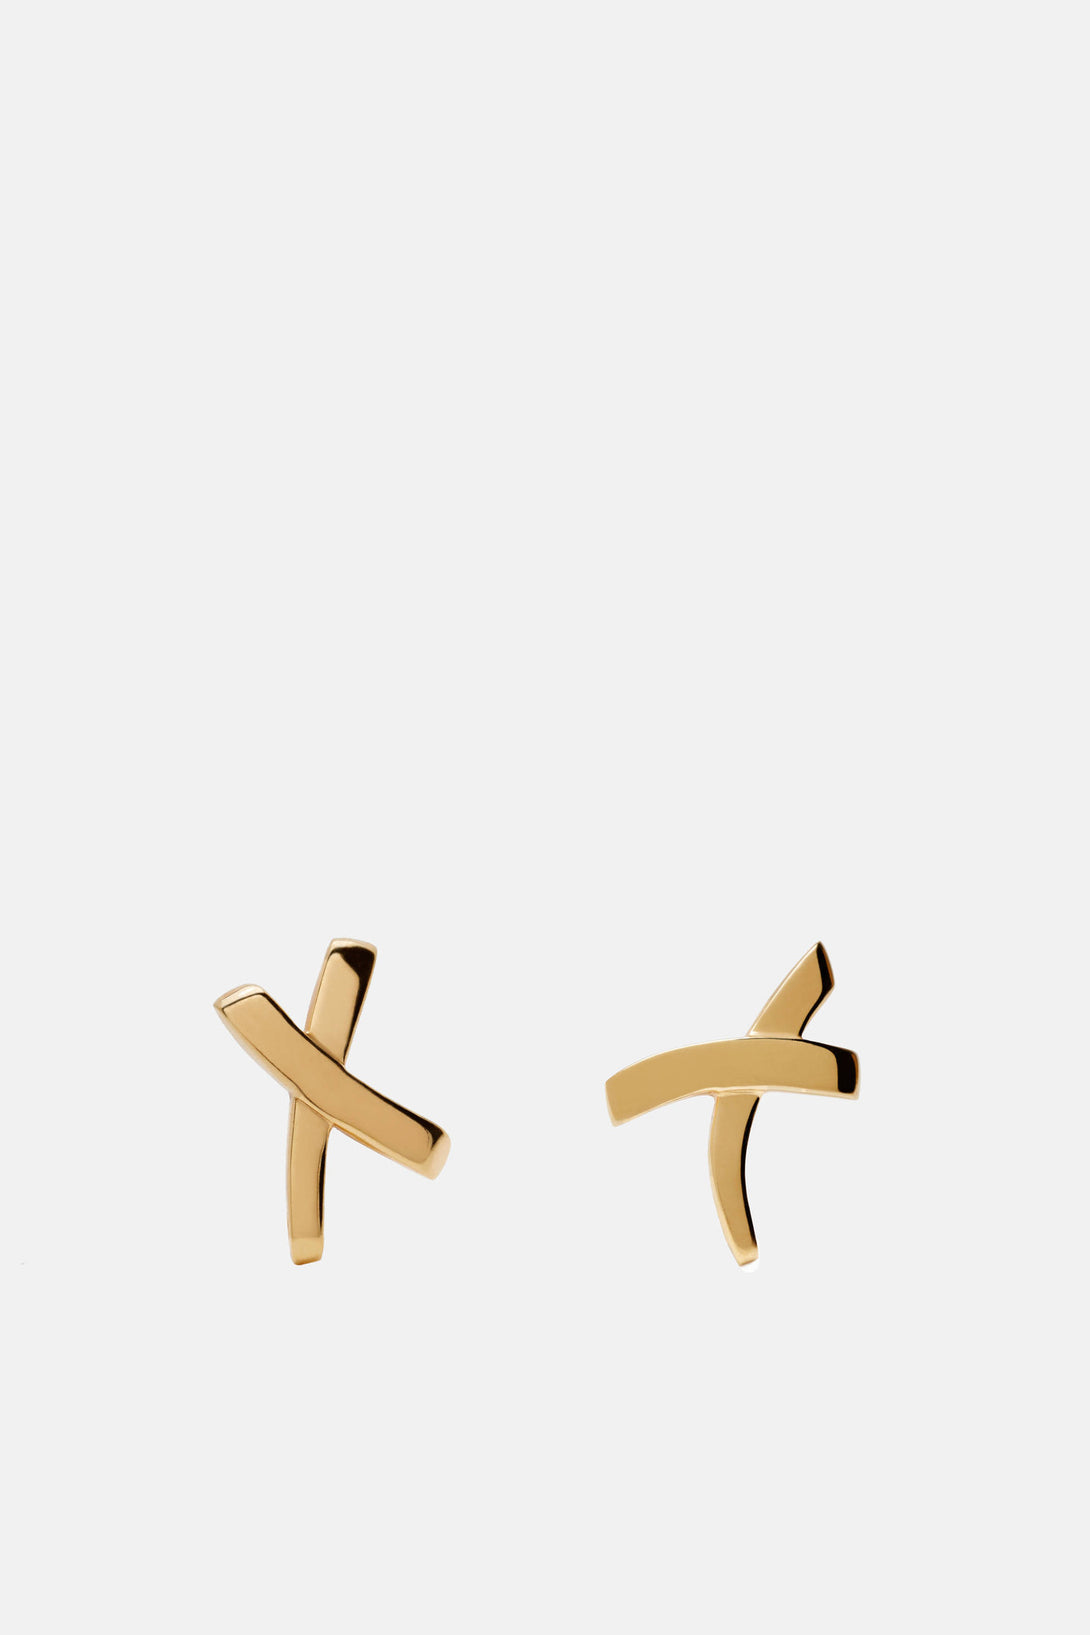 paloma picasso x earrings